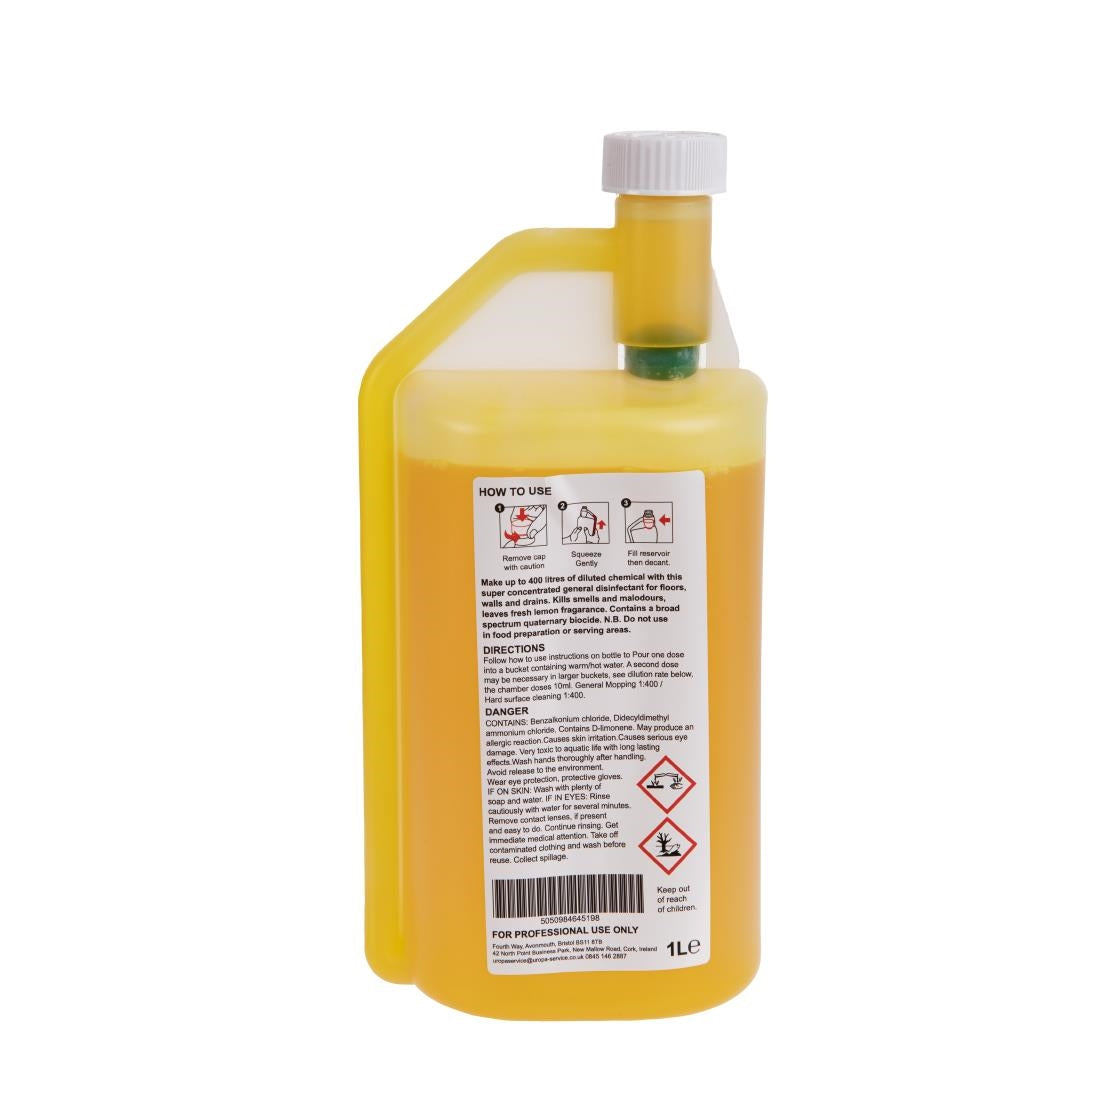 FE780 Jantex Disinfectant and Floor Cleaner Super Concentrate 1Ltr JD Catering Equipment Solutions Ltd